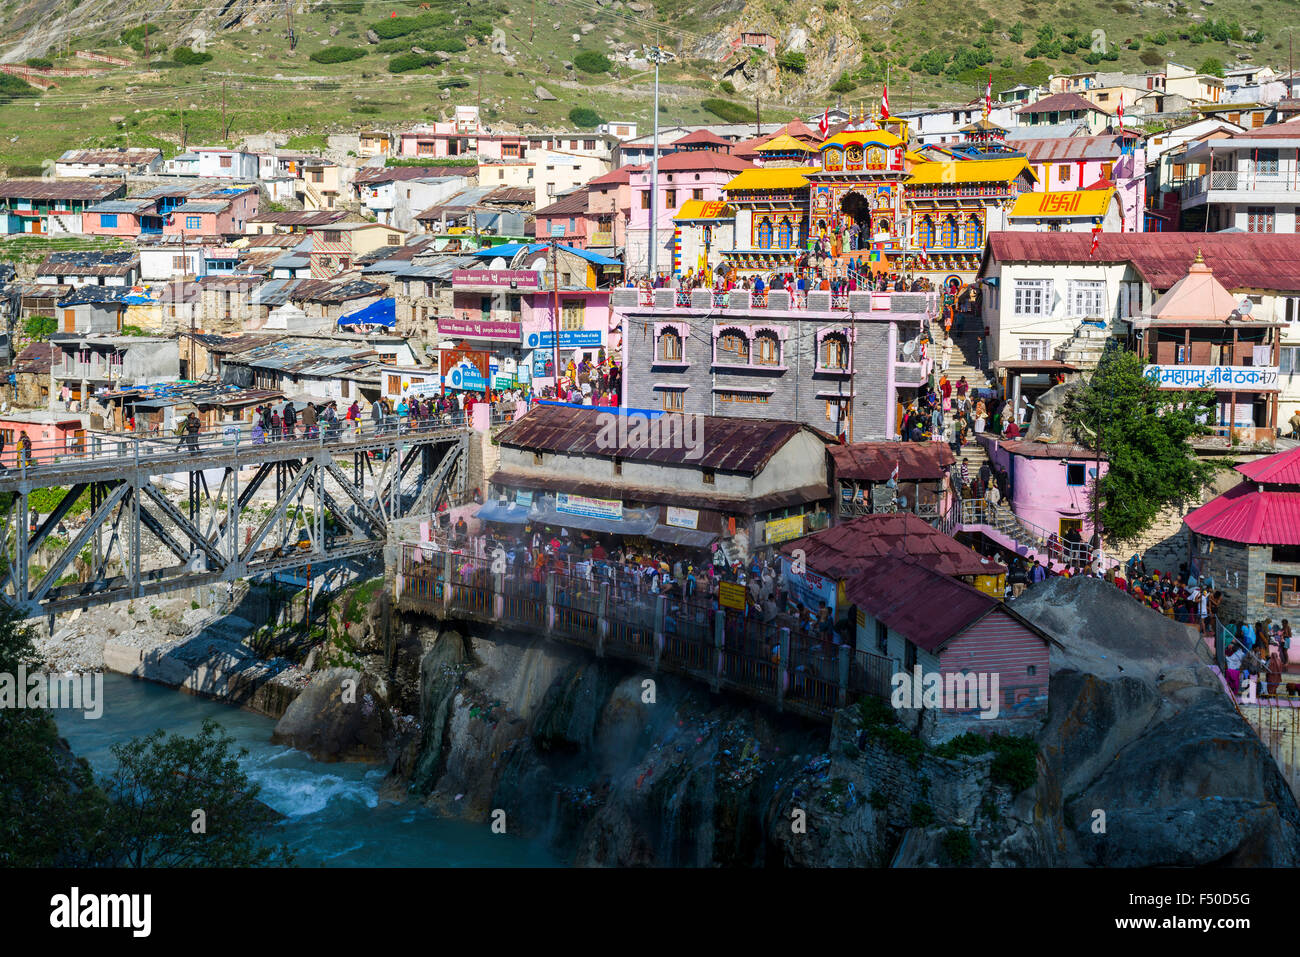 The colorful Badrinath Temple, one of the Dschar Dham destinations, is located in the middle of town Stock Photo